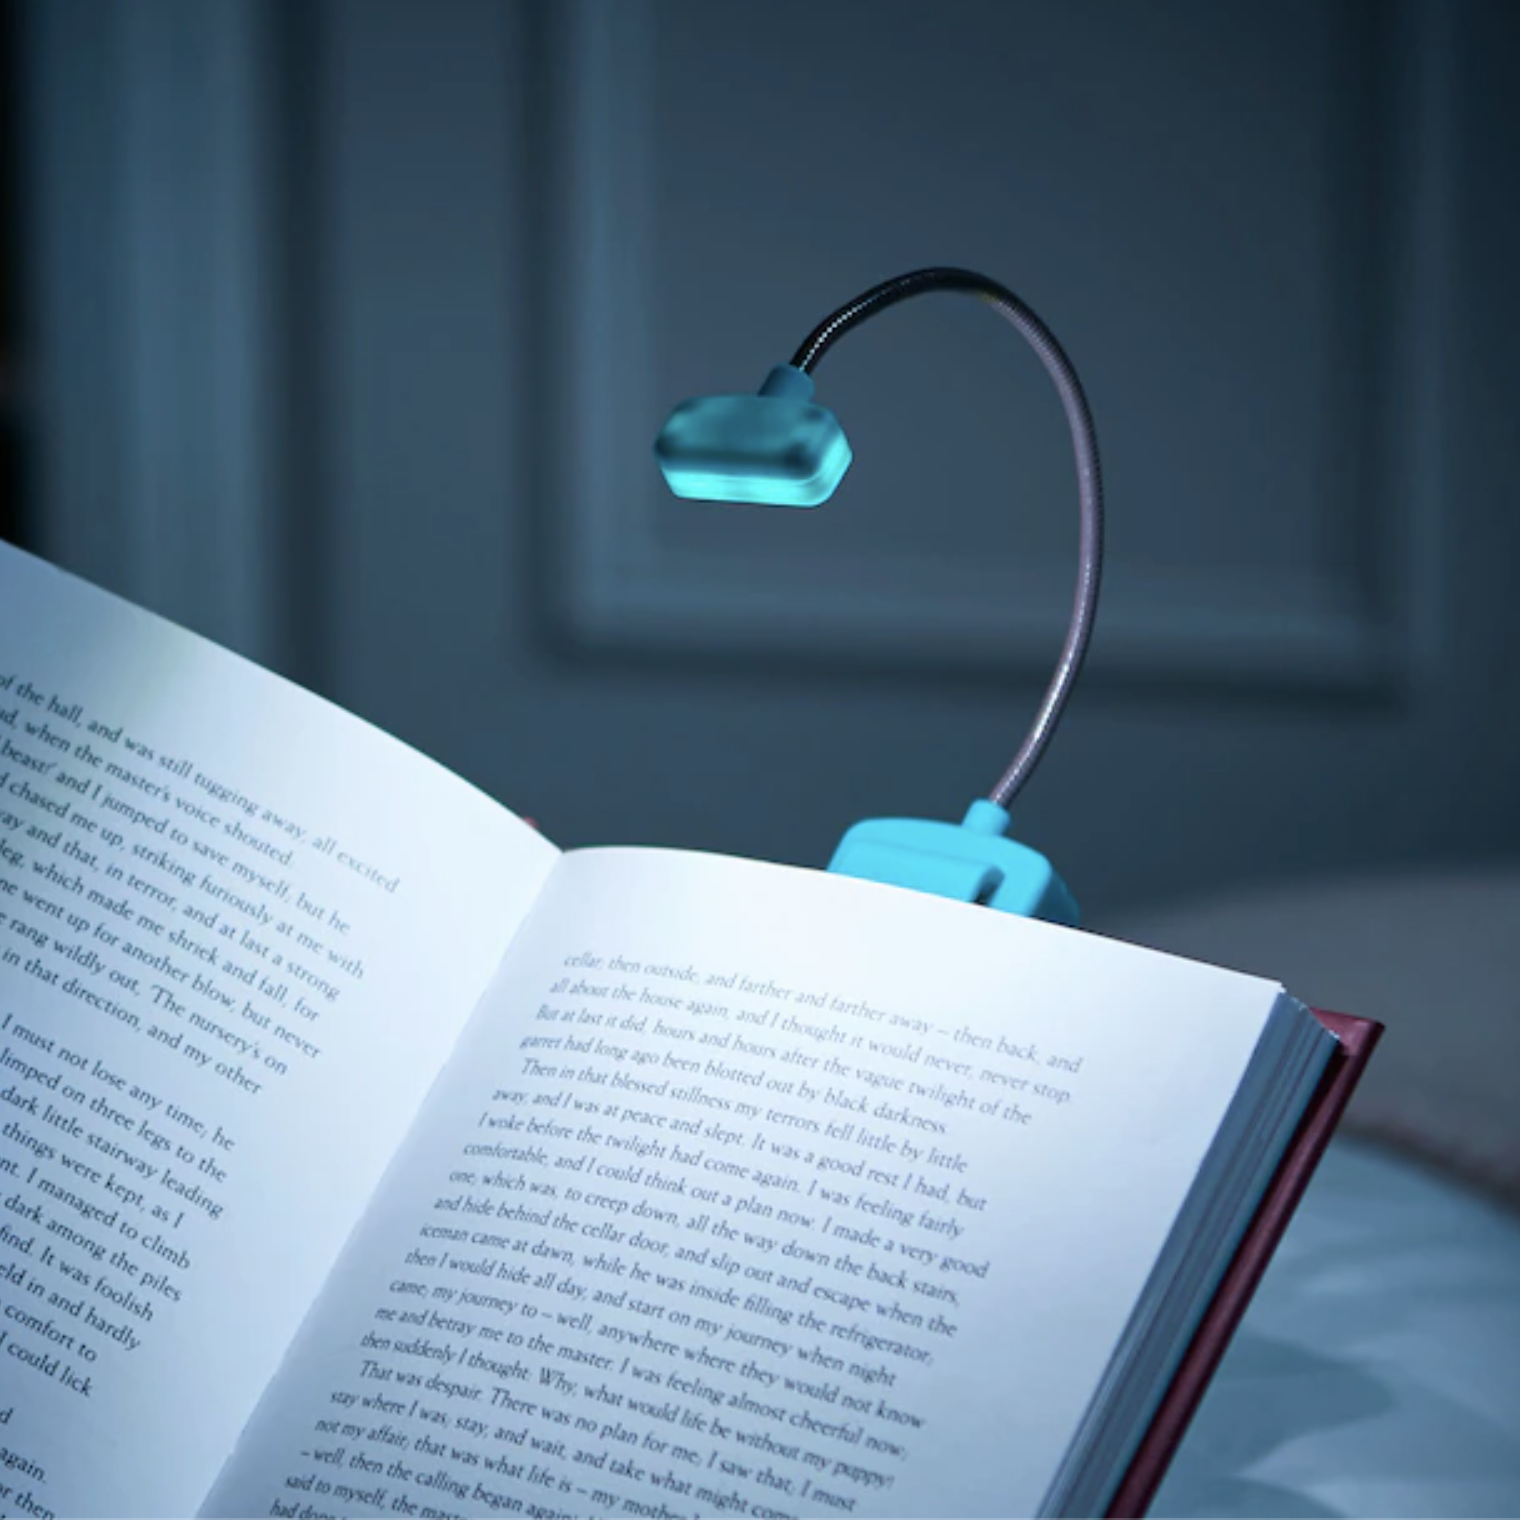 The book light clipped to a book